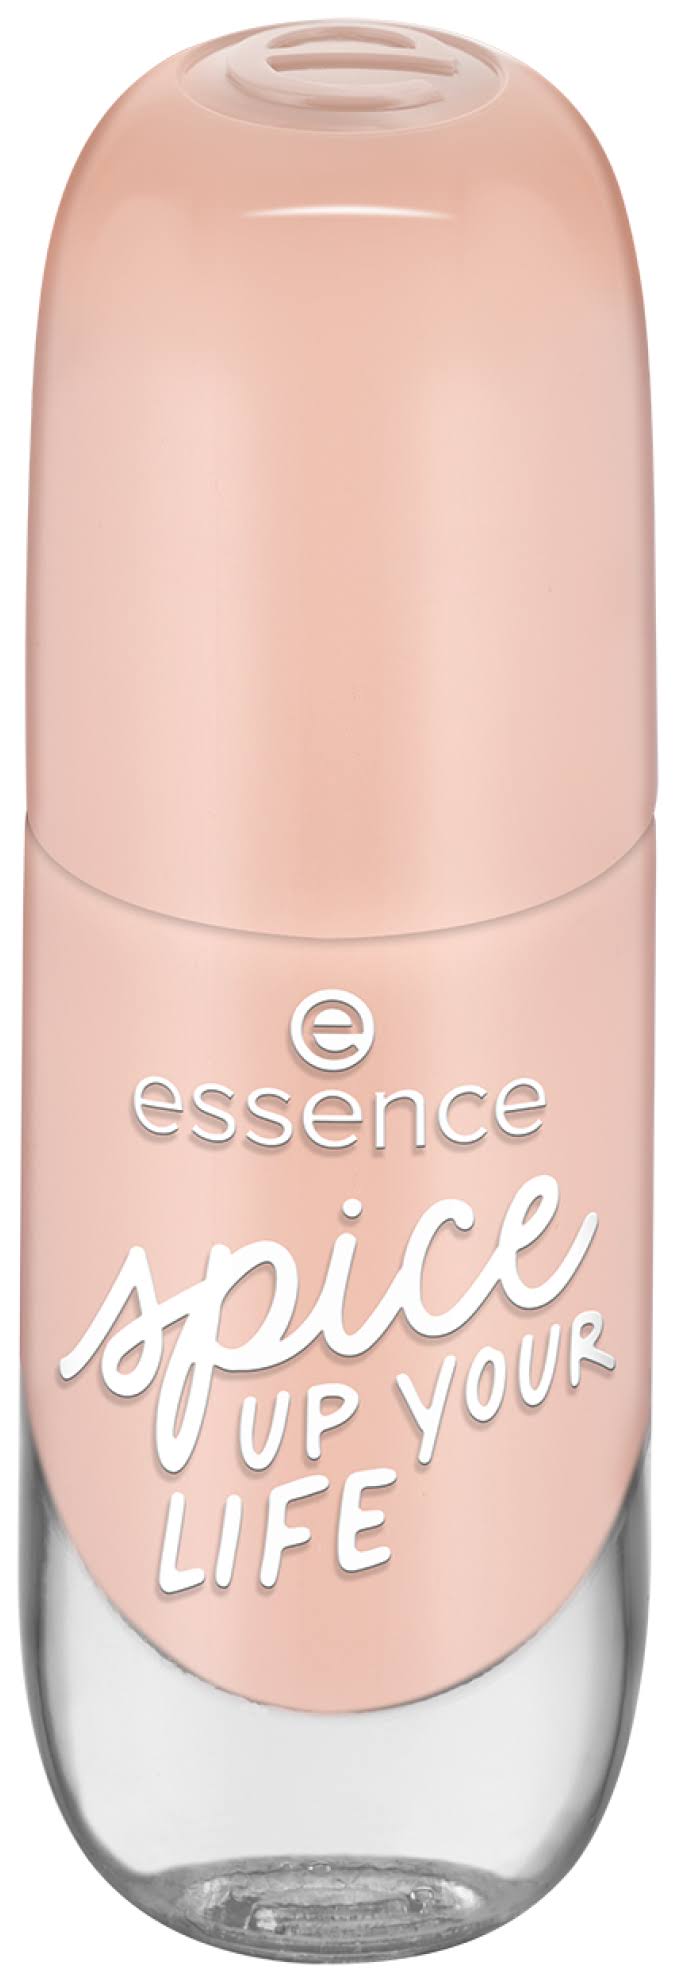 Essence Gel Nail Colour 09 Spice Up Your Life 8ml